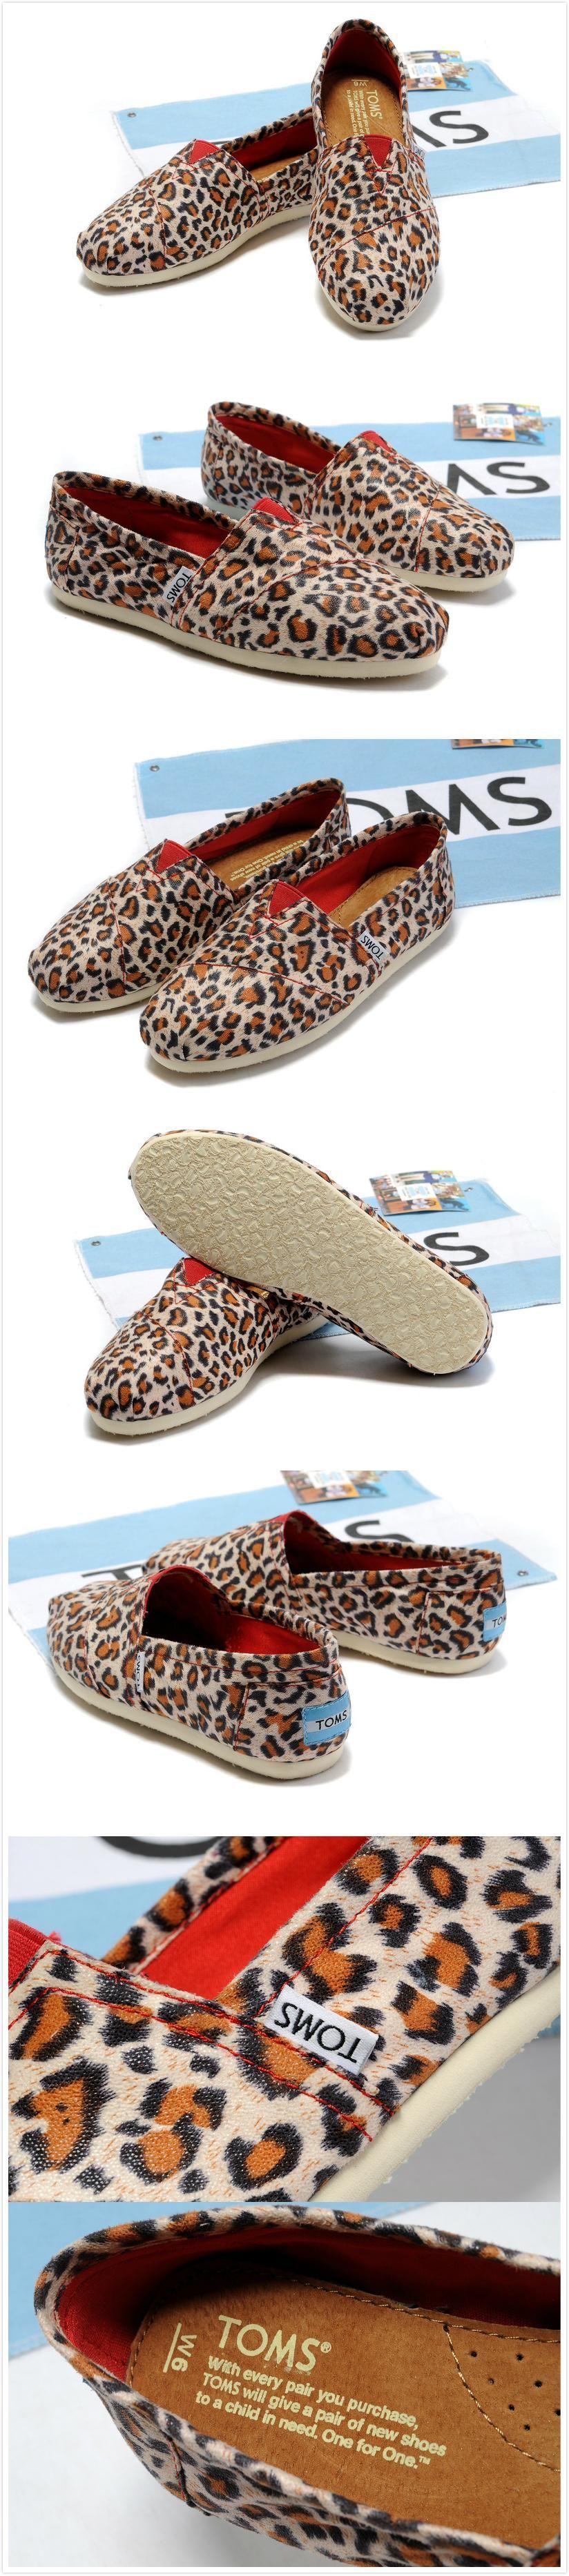 Toms Shoes OUTLET…$19.99!